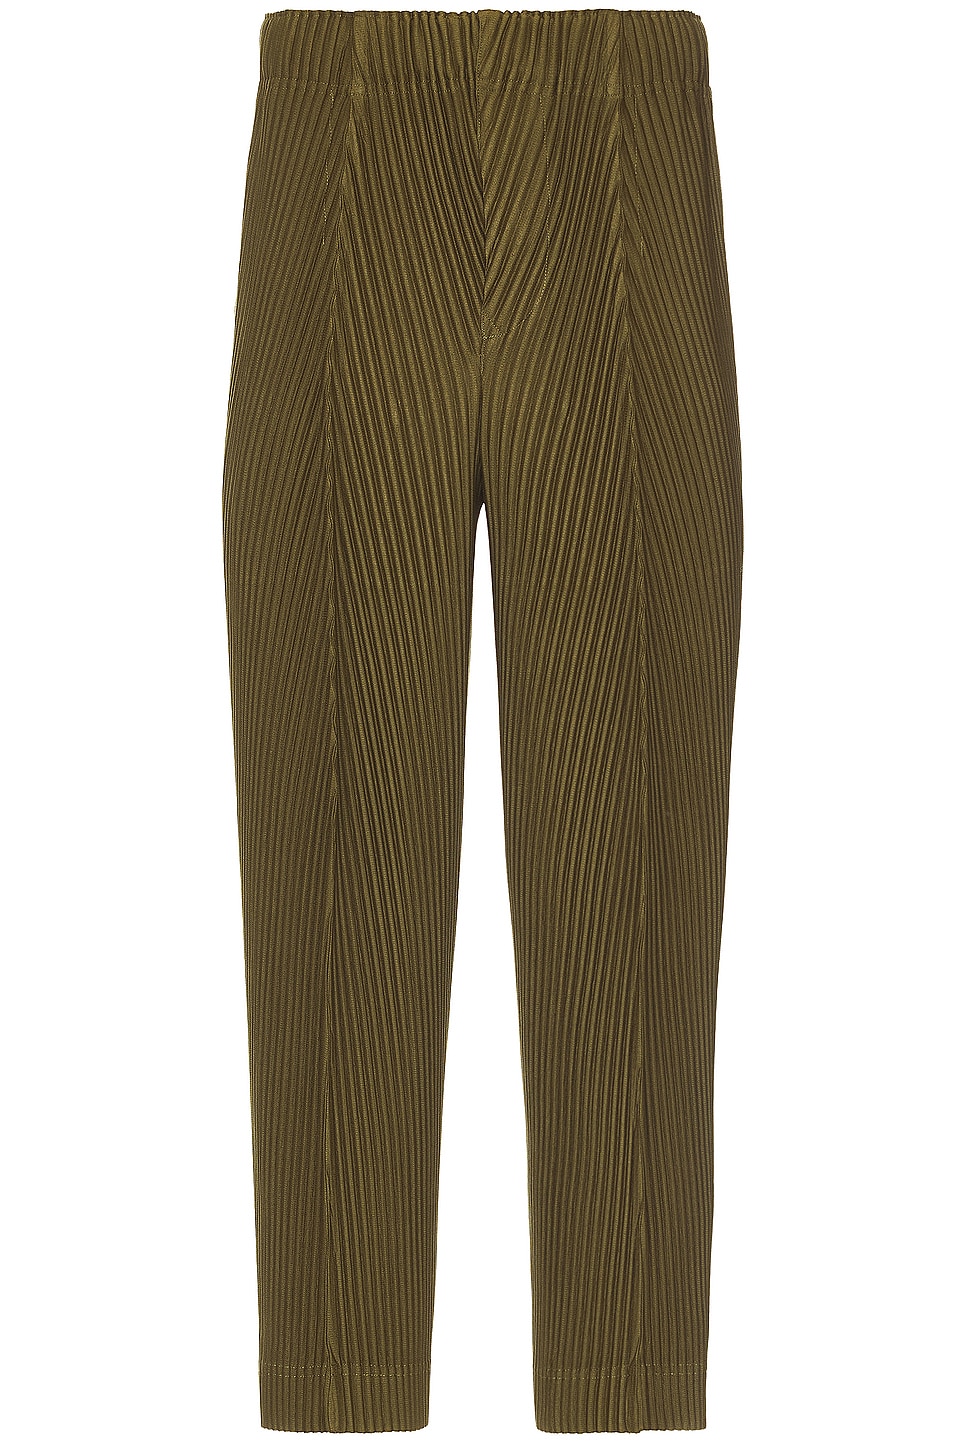 Image 1 of Homme Plisse Issey Miyake Pleats Pants in Olive